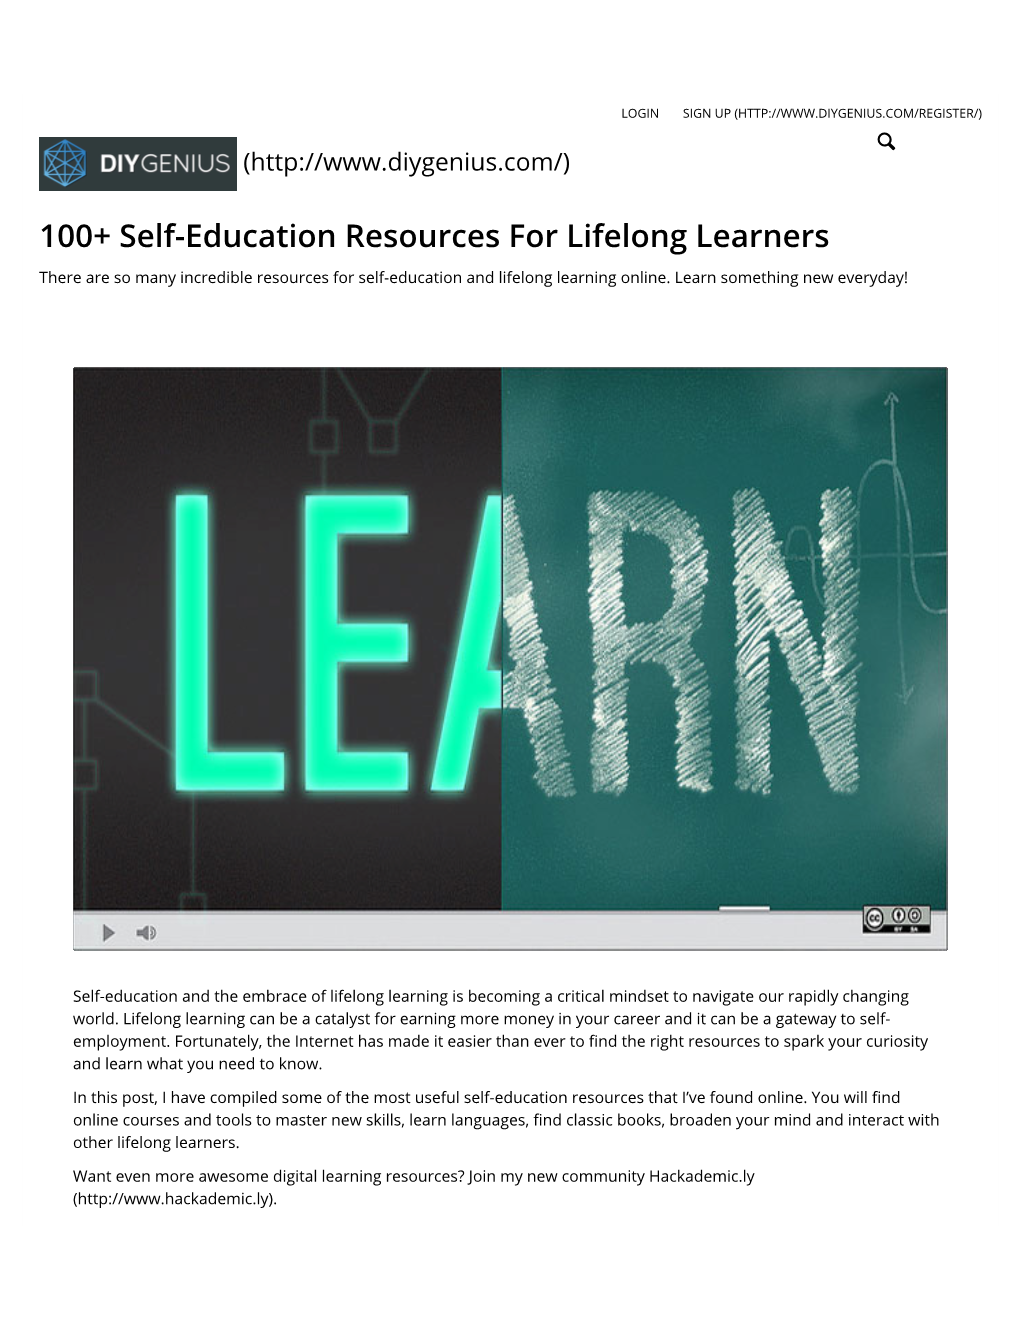 100+ Self-Education Resources for Lifelong Learners There Are So Many Incredible Resources for Self-Education and Lifelong Learning Online